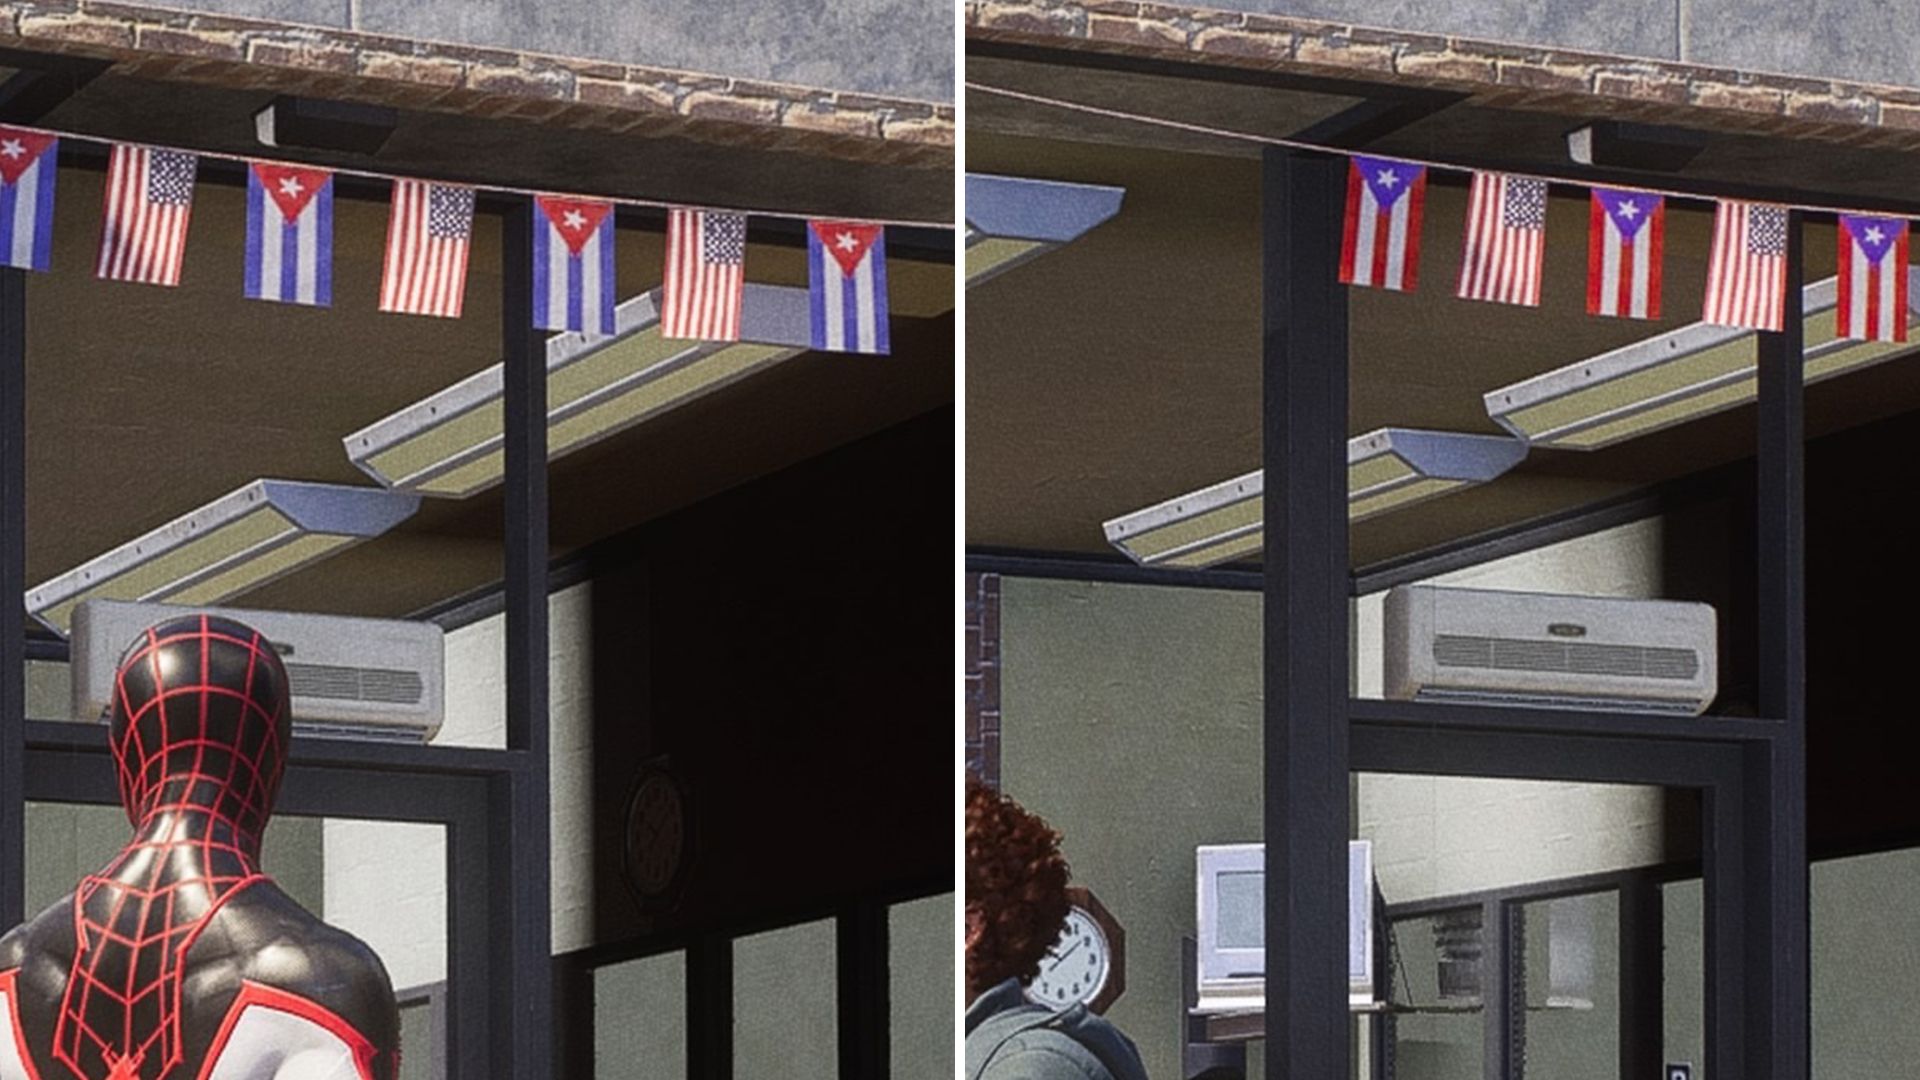 Two video game screenshots showing a row of small flags. The first shot shows Cuban flags. The second shows Puerto Rican flags in their place.